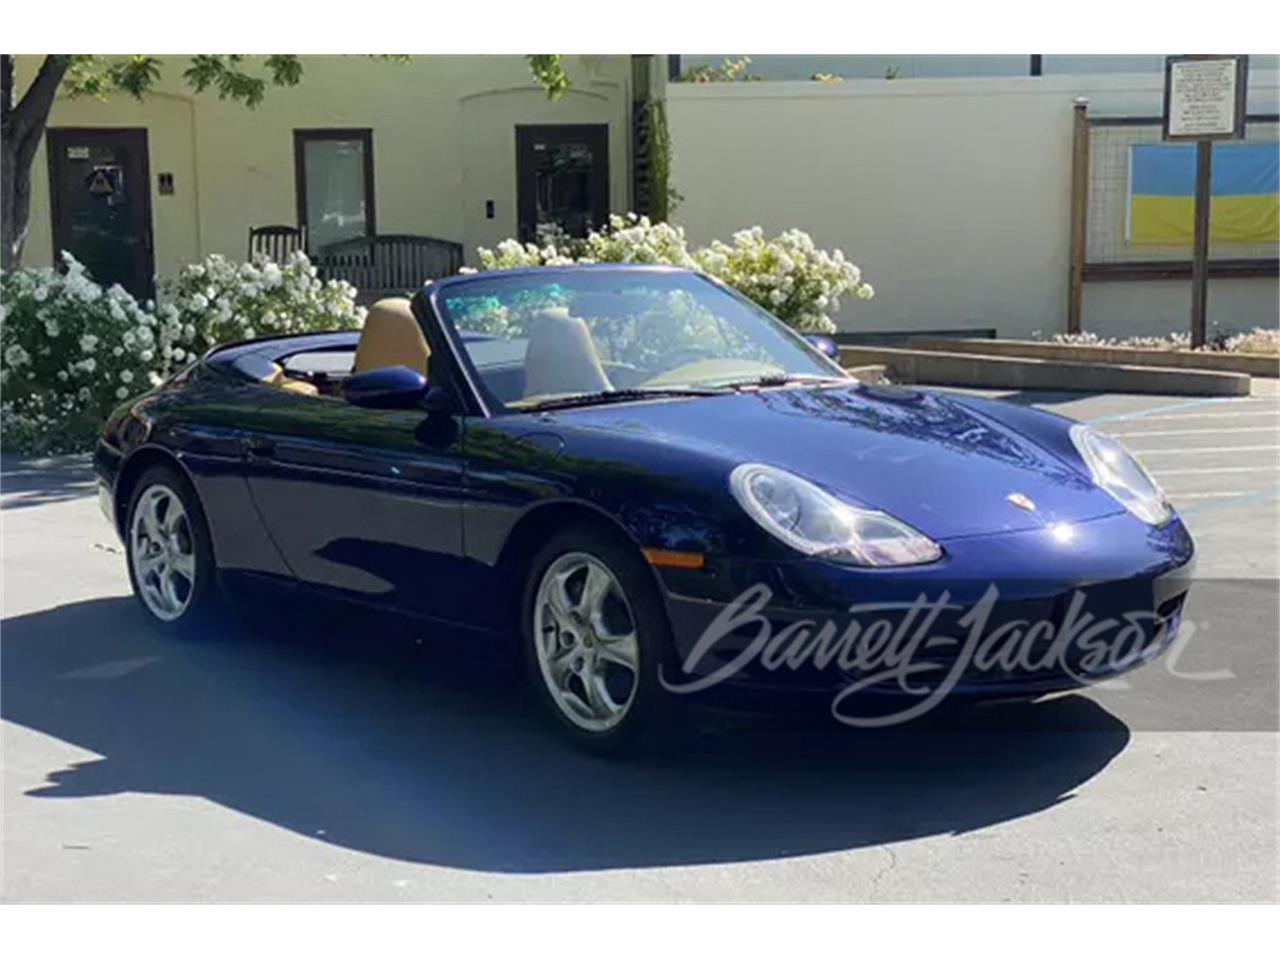 For Sale at Auction: 2001 Porsche 911 Carrera in Scottsdale, Arizona for sale in Scottsdale, AZ